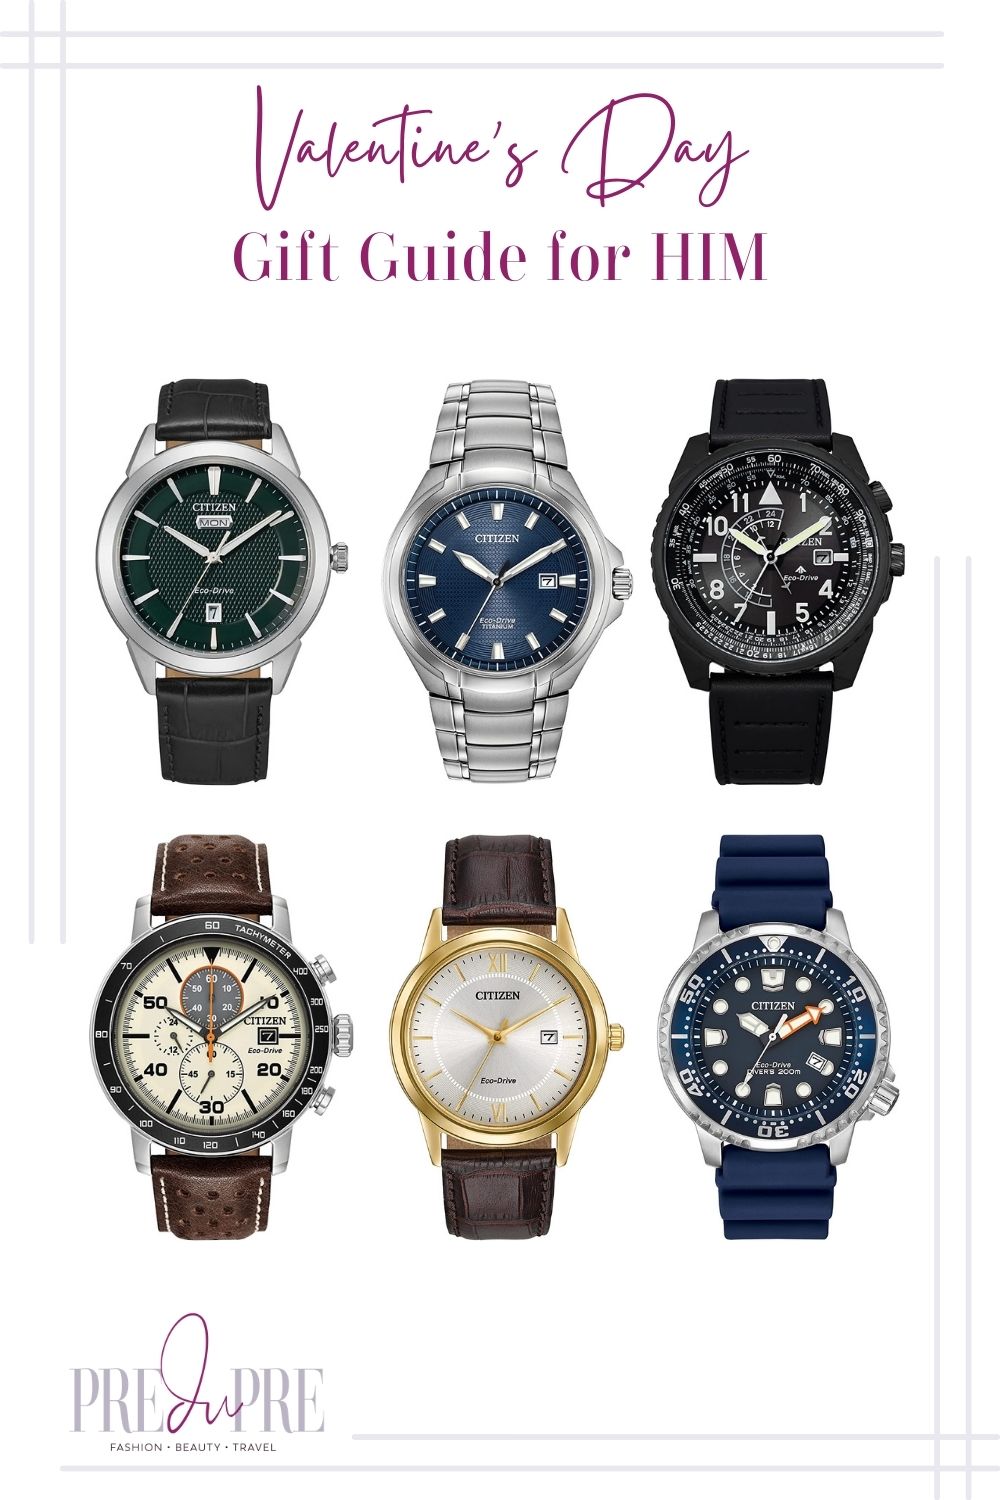 Collage of images of different kind of Citizen watches with text in the center top stating "Valentine's Day Gift Guide for Him."